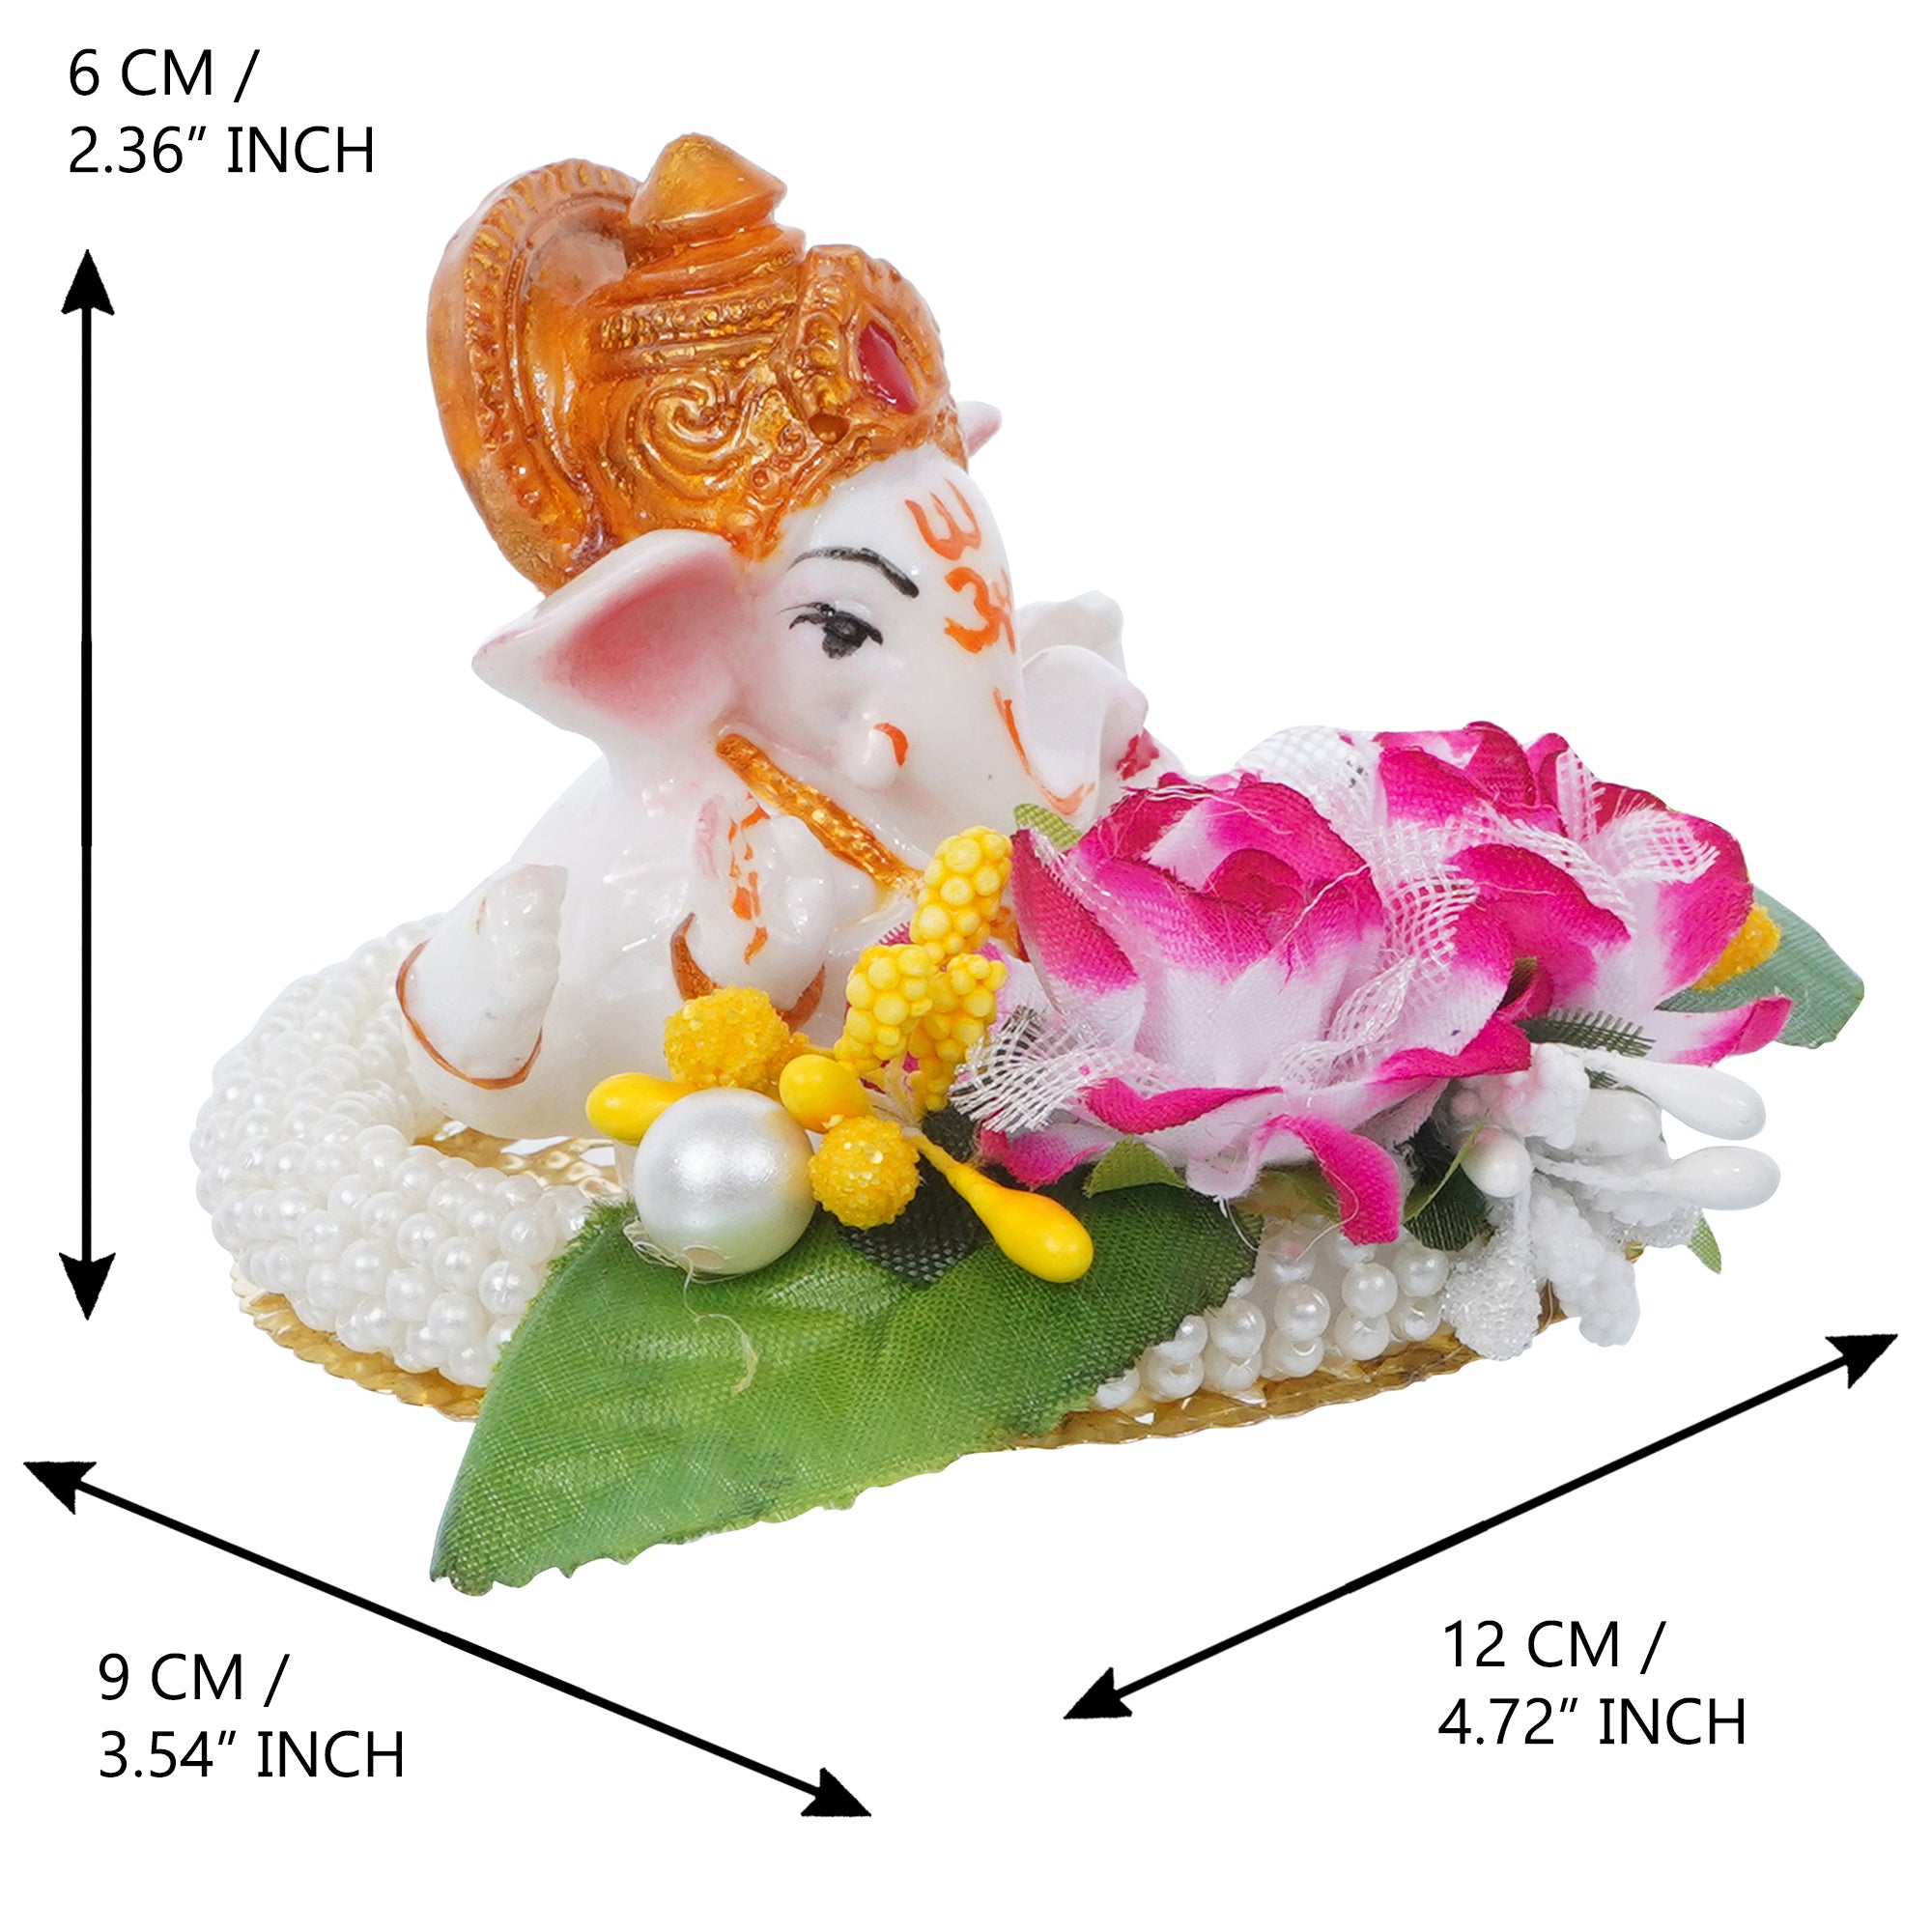 Lord Ganesha Idol on Decorative Handcrafted Plate with Colorful Flowers and Leaf 3